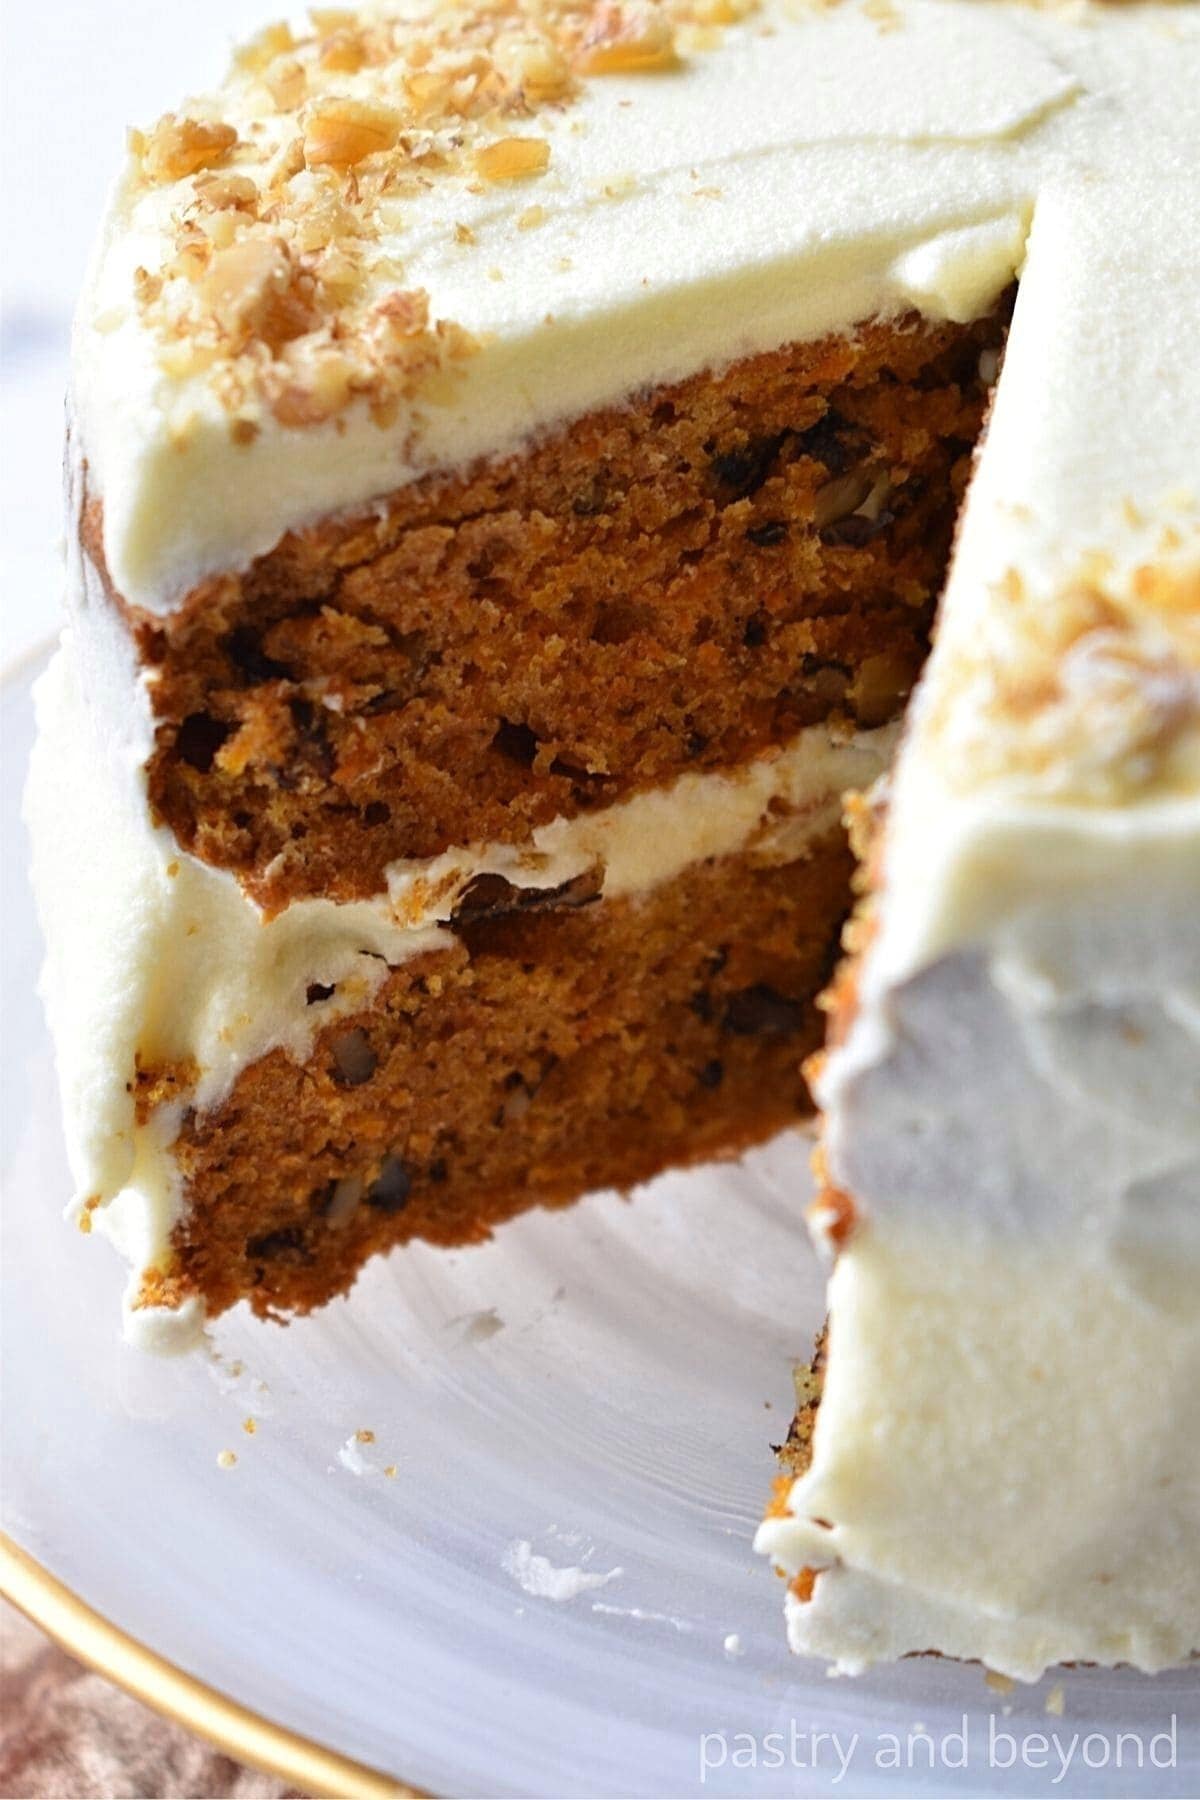 Mini carrot cake on a cake stand with a slice taken from it.